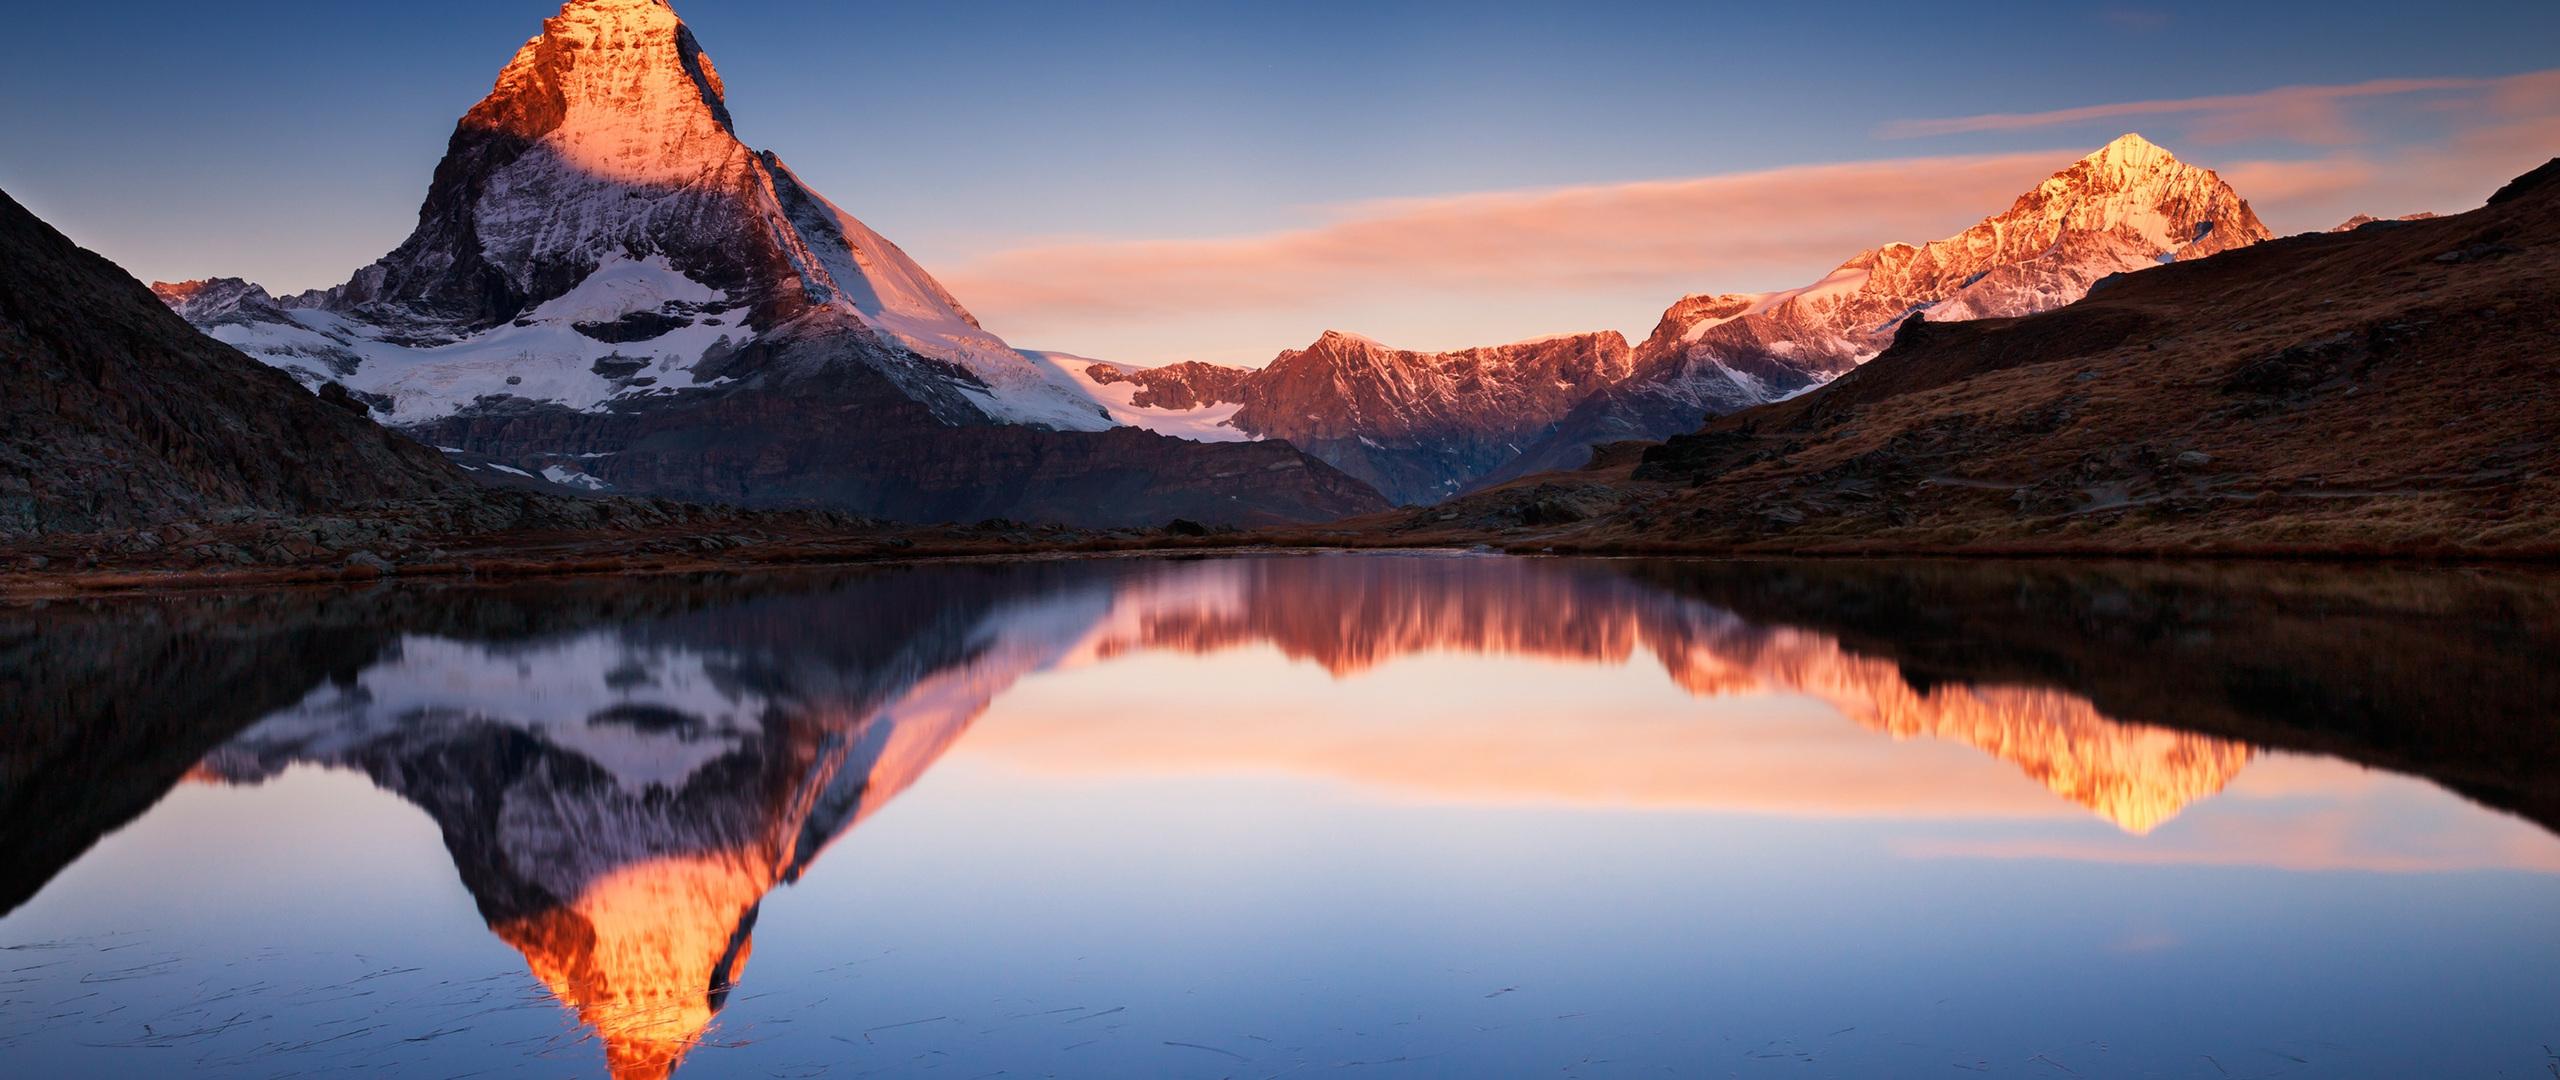 2560 x 1080 · jpeg - 2560x1080 Apple Mountains 2560x1080 Resolution HD 4k Wallpapers, Images ...